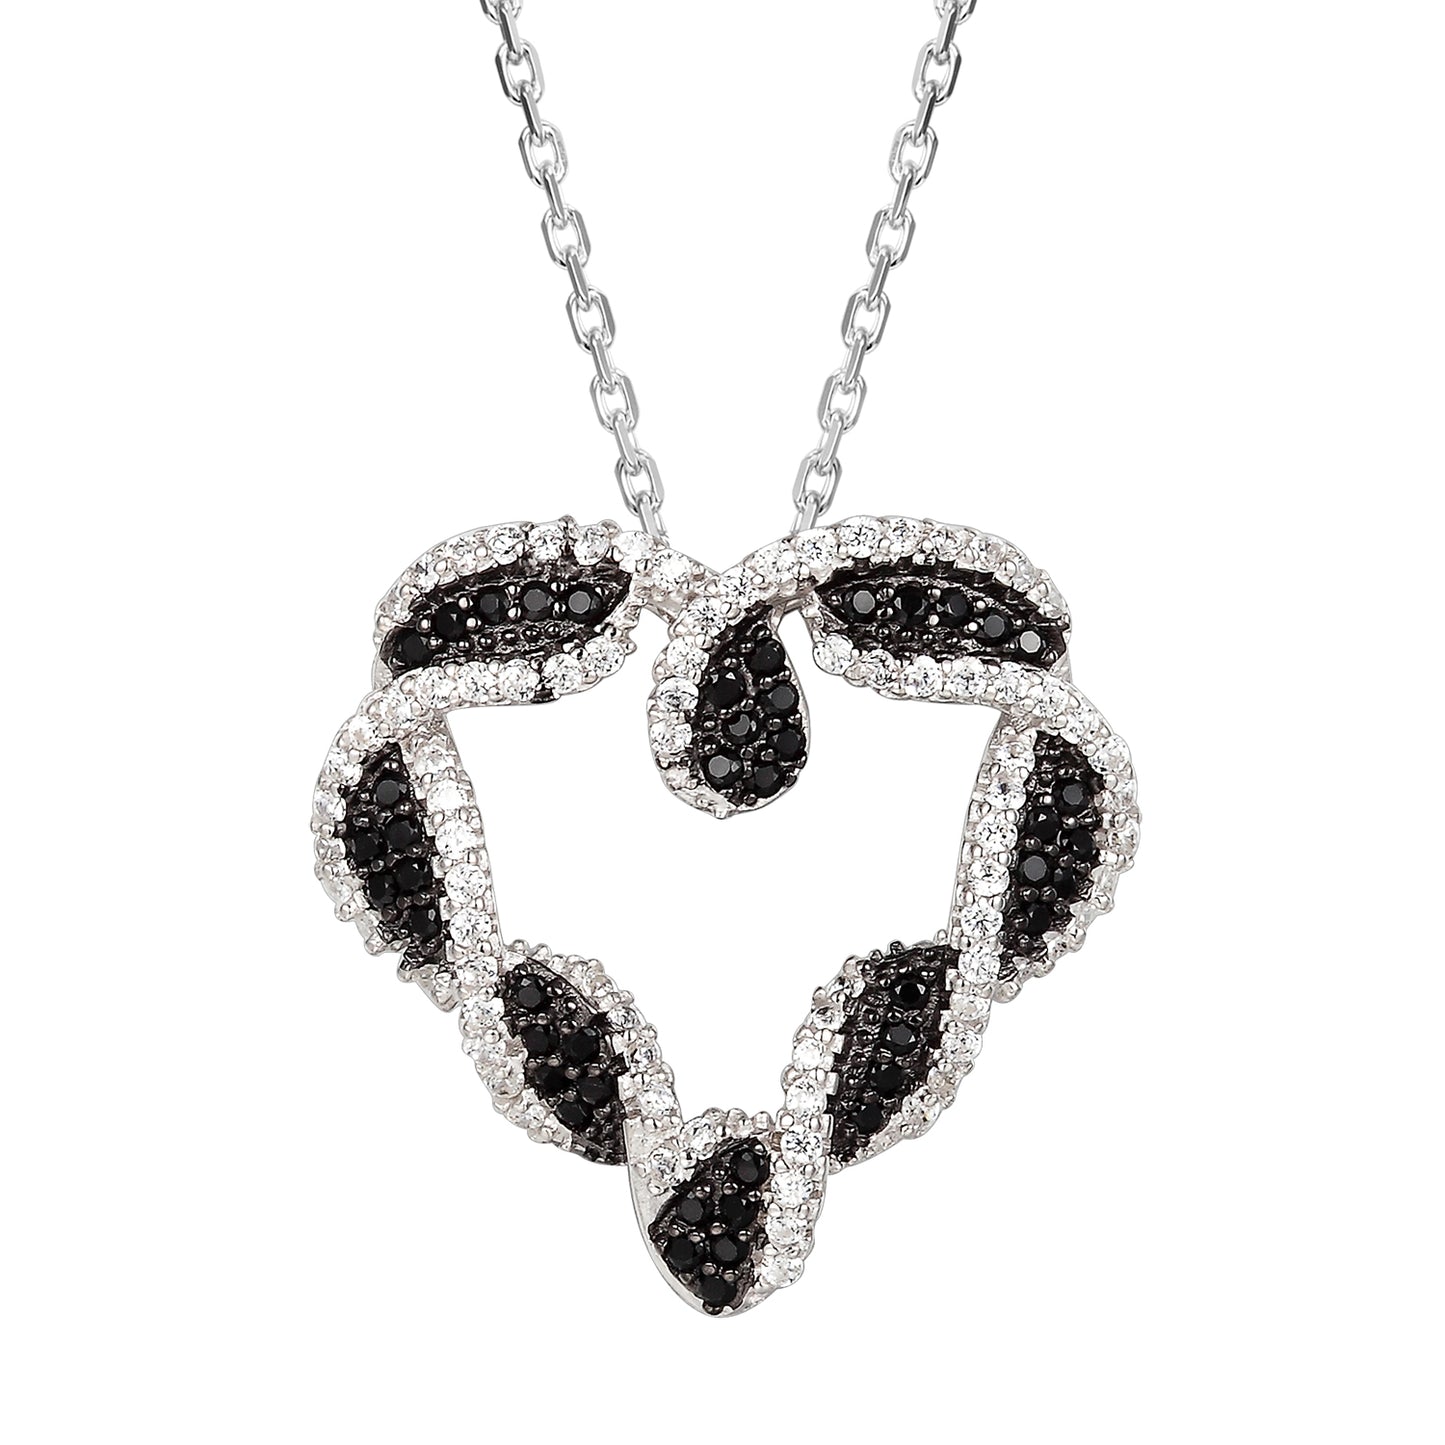 Twisted Black &White Sterling Silver Heart Pendant Valentine's